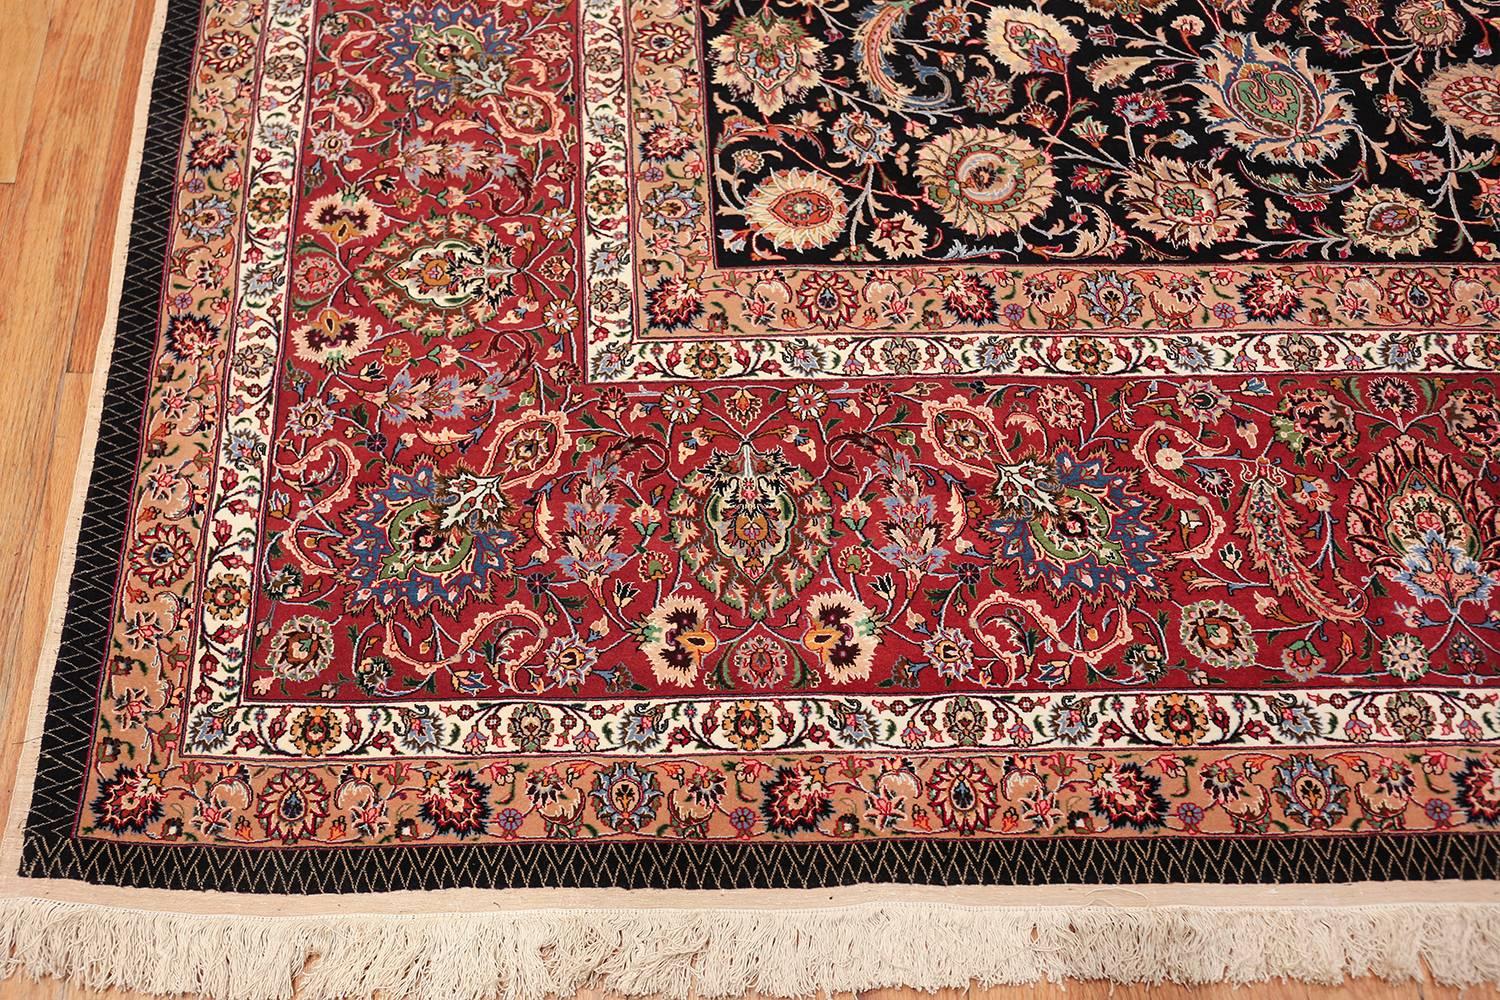 Hand-Knotted Silk and Wool Vintage Khorassan Persian Rug. Size: 11' 3